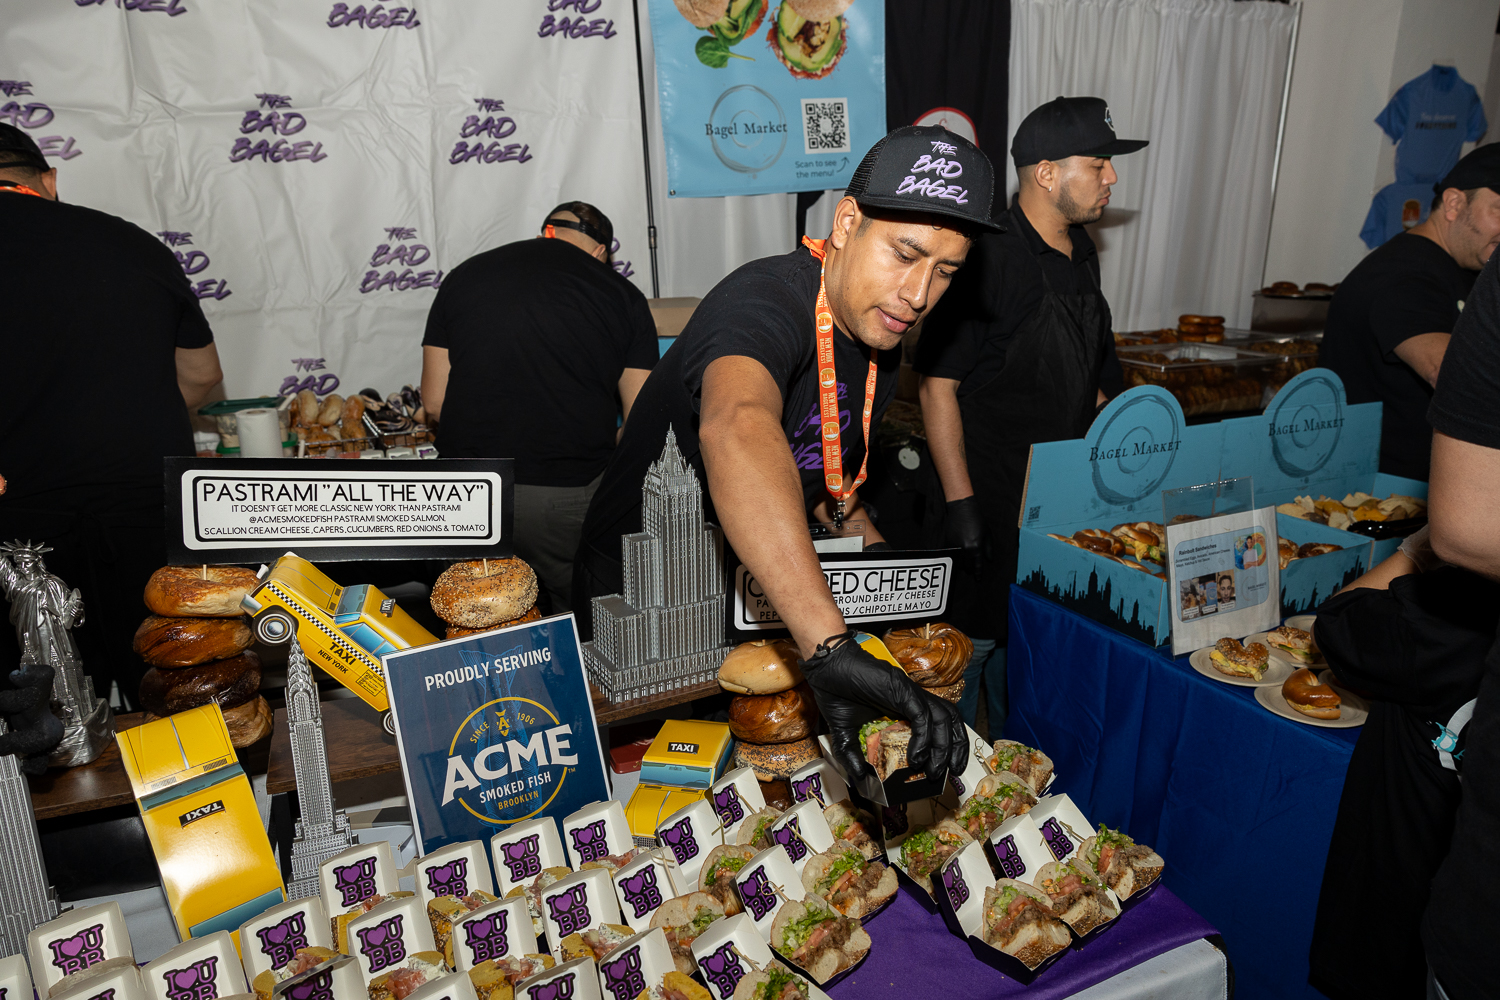 A man wearing a black hat and black shirt with purple accents stands behind a display table.